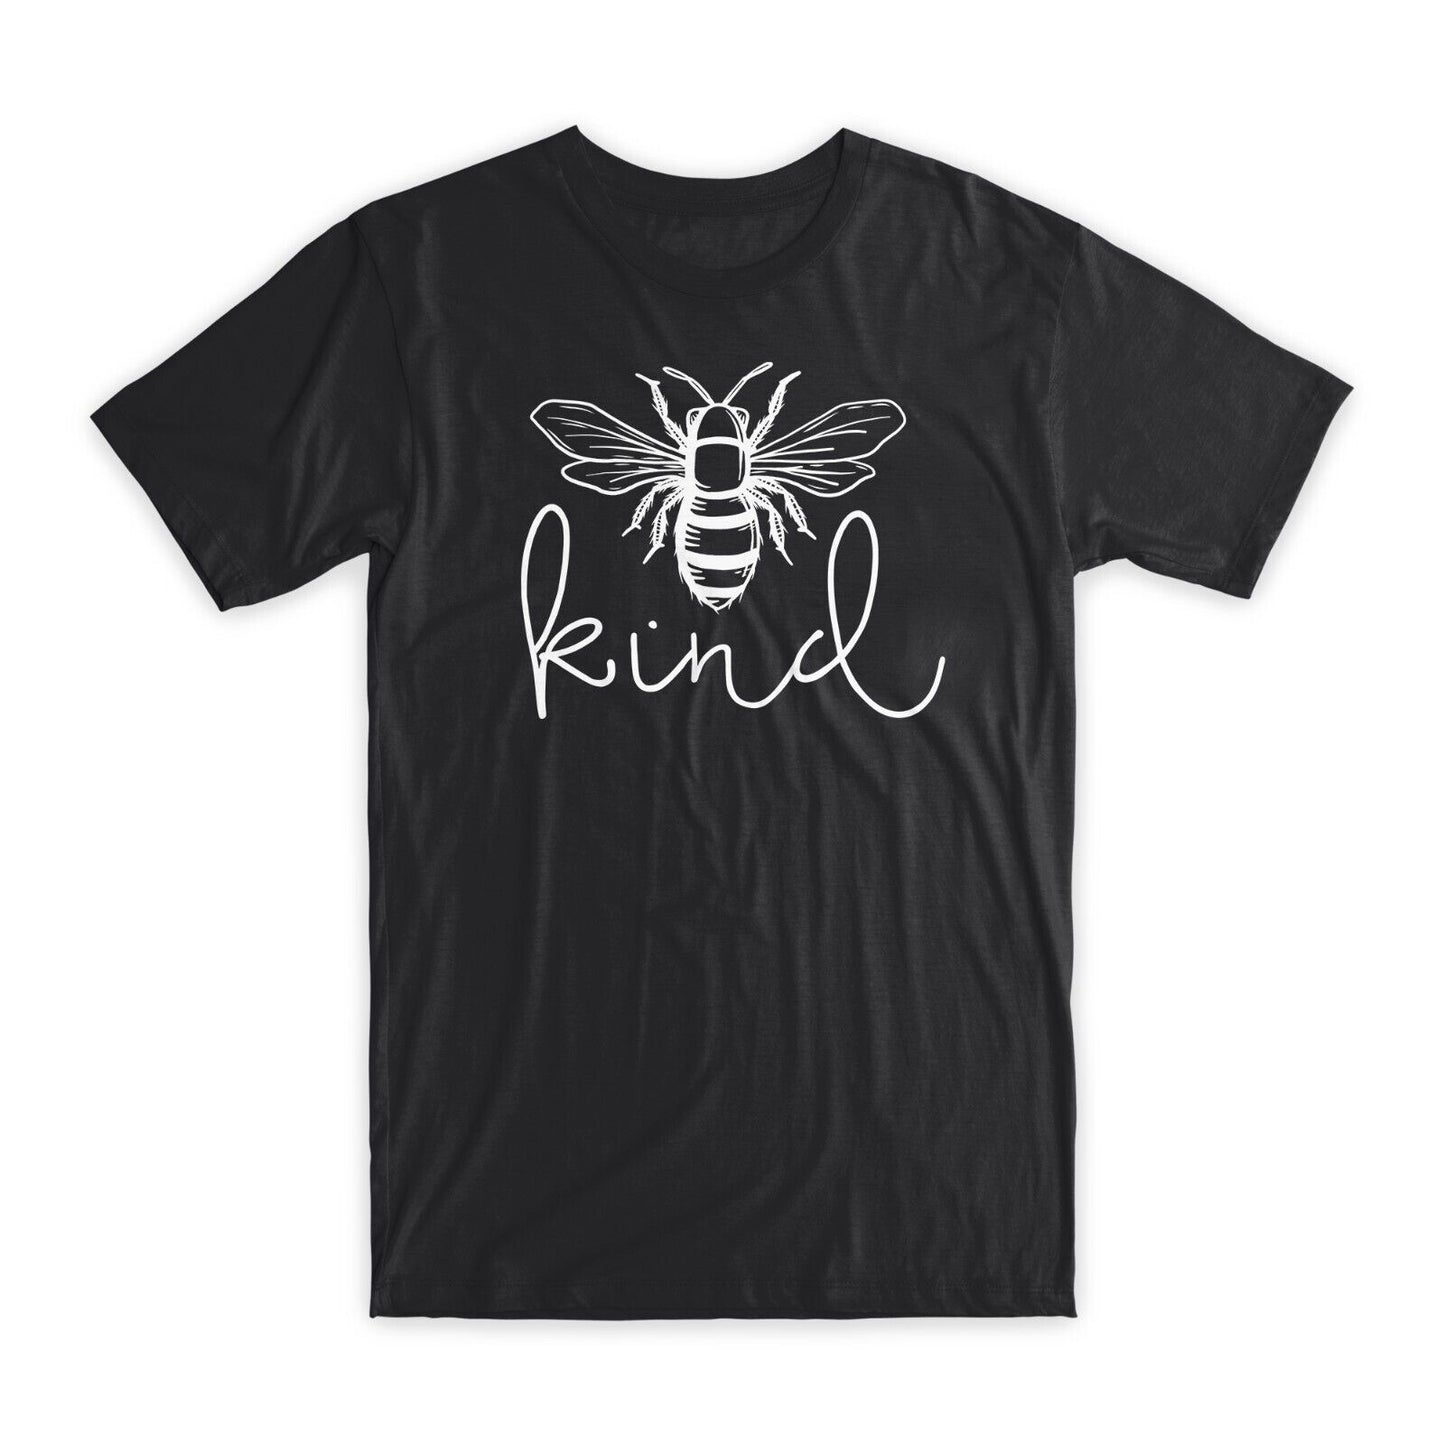 Bee Kind Print T-Shirt Premium Soft Cotton Crew Neck Funny Tees Novelty Gift NEW